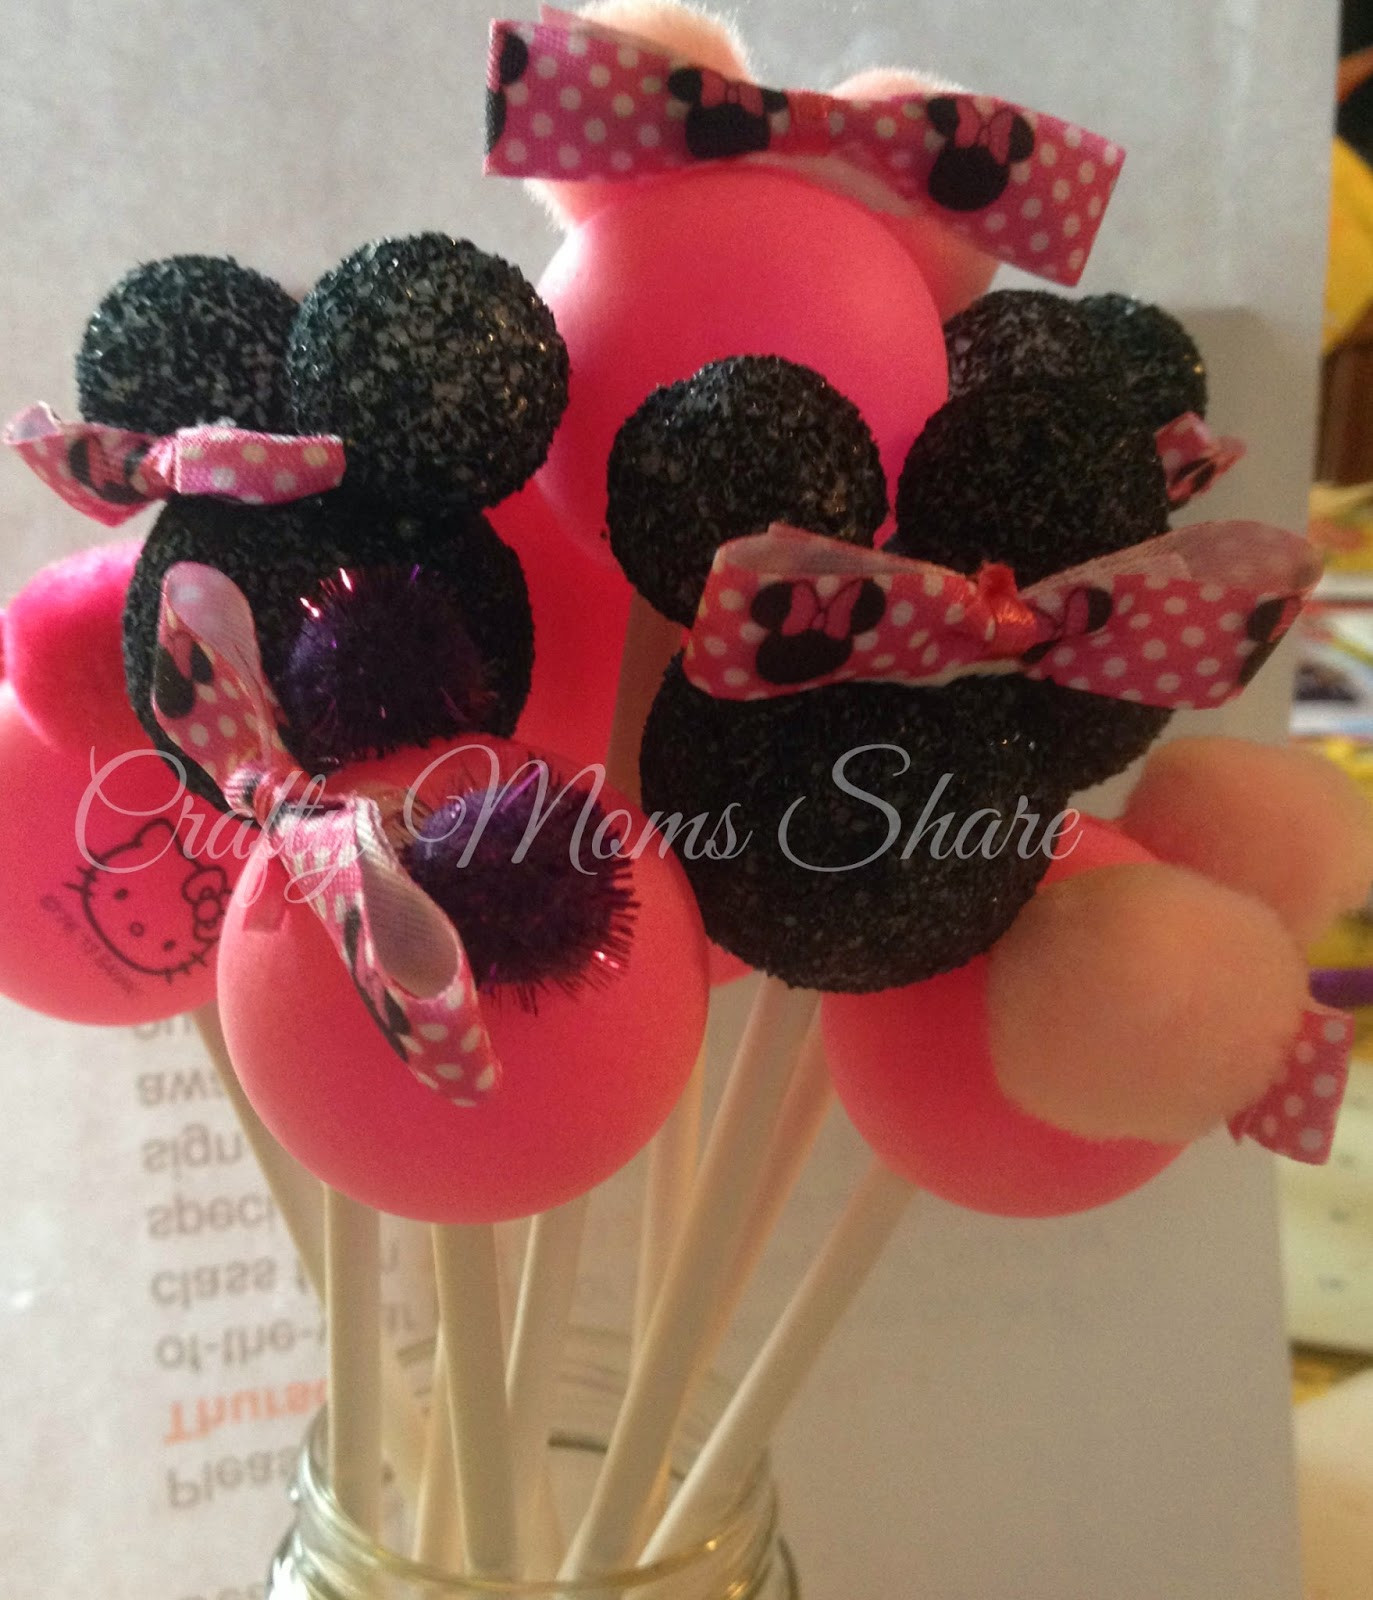 DIY Minnie Mouse Party Decorations
 Crafty Moms Minnie Mouse Birthday Party DIY